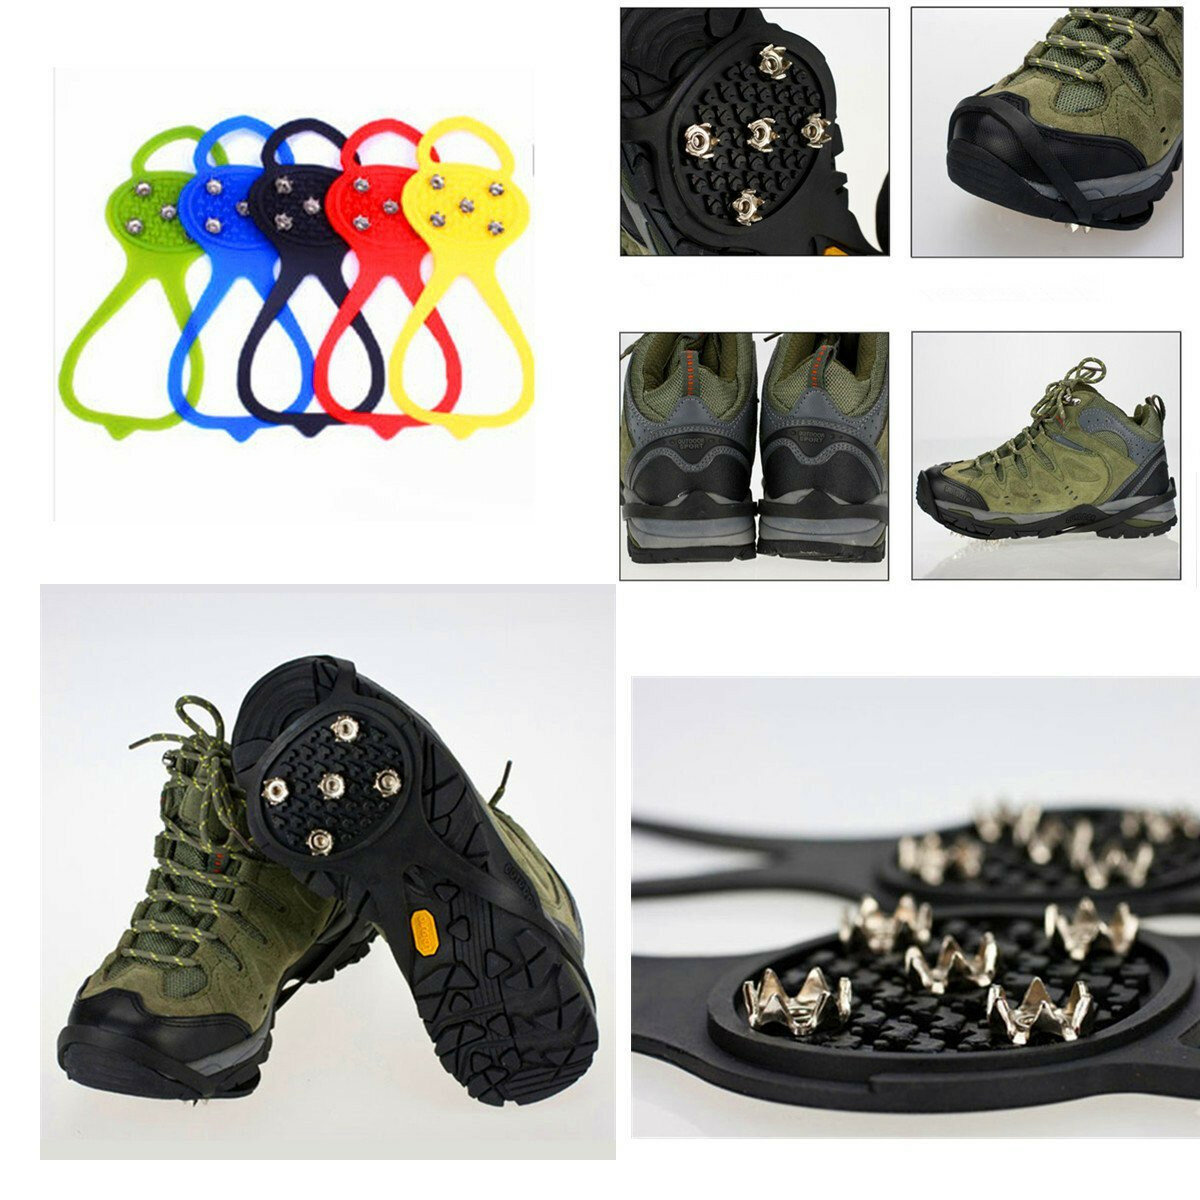 Anti-slip-Non-slip-Shoes-Cover-Spikes-Crampons-Grip-Ice-Snow-Footwear-933223-1